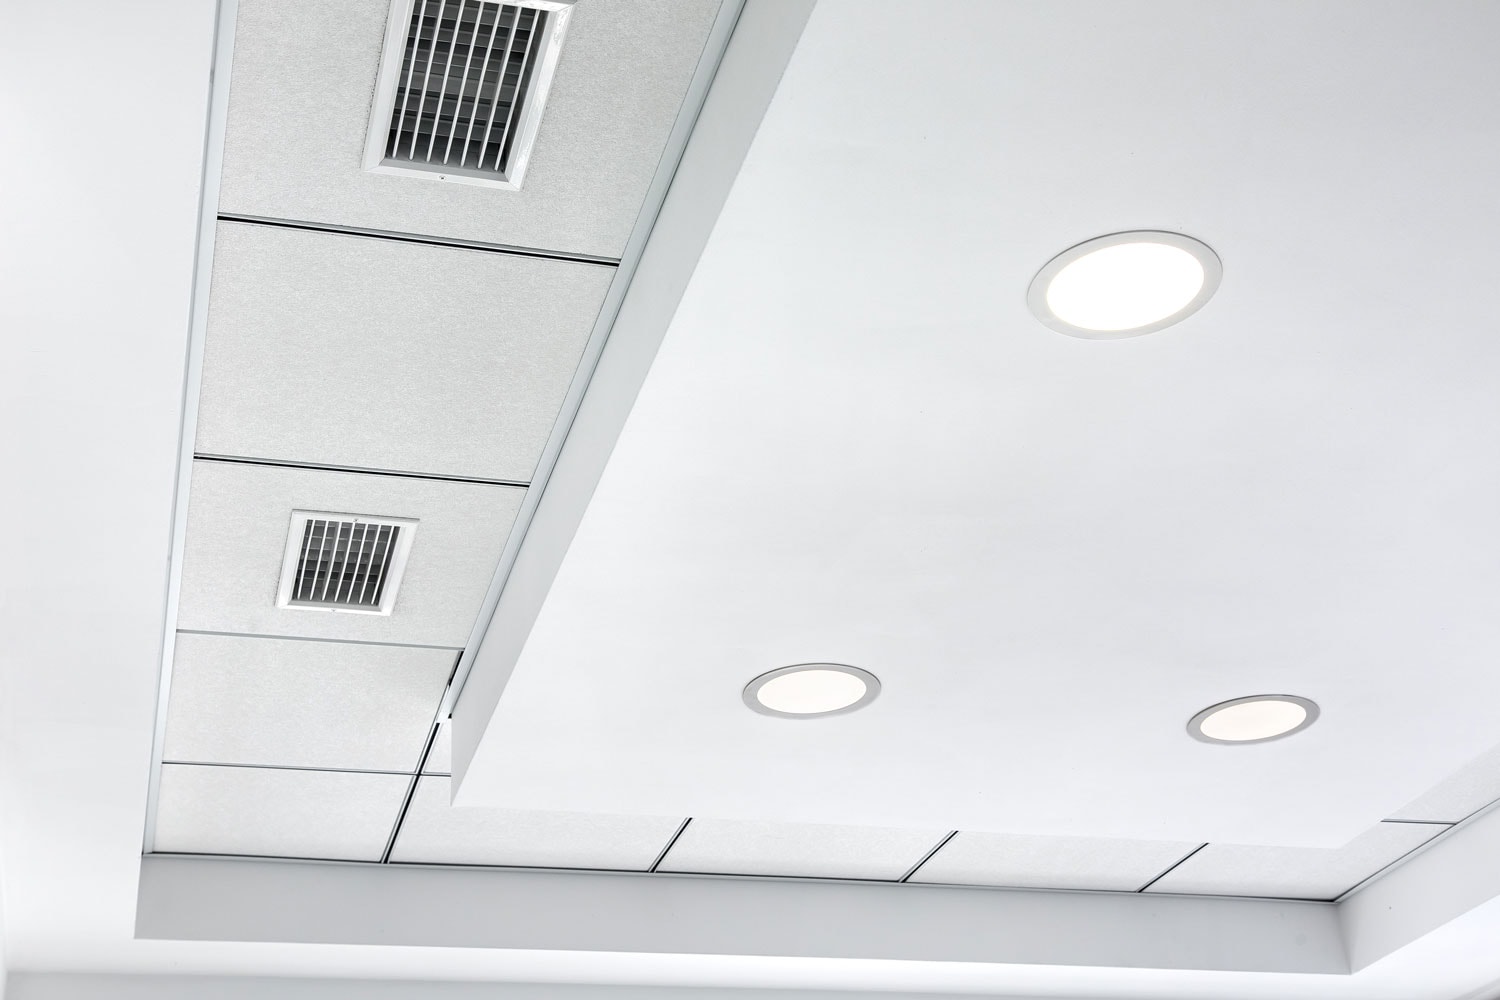 multi-level ceiling with three-dimensional protrusions and a suspended tiled ceiling with a built-in round led light and grille ventilation system. 